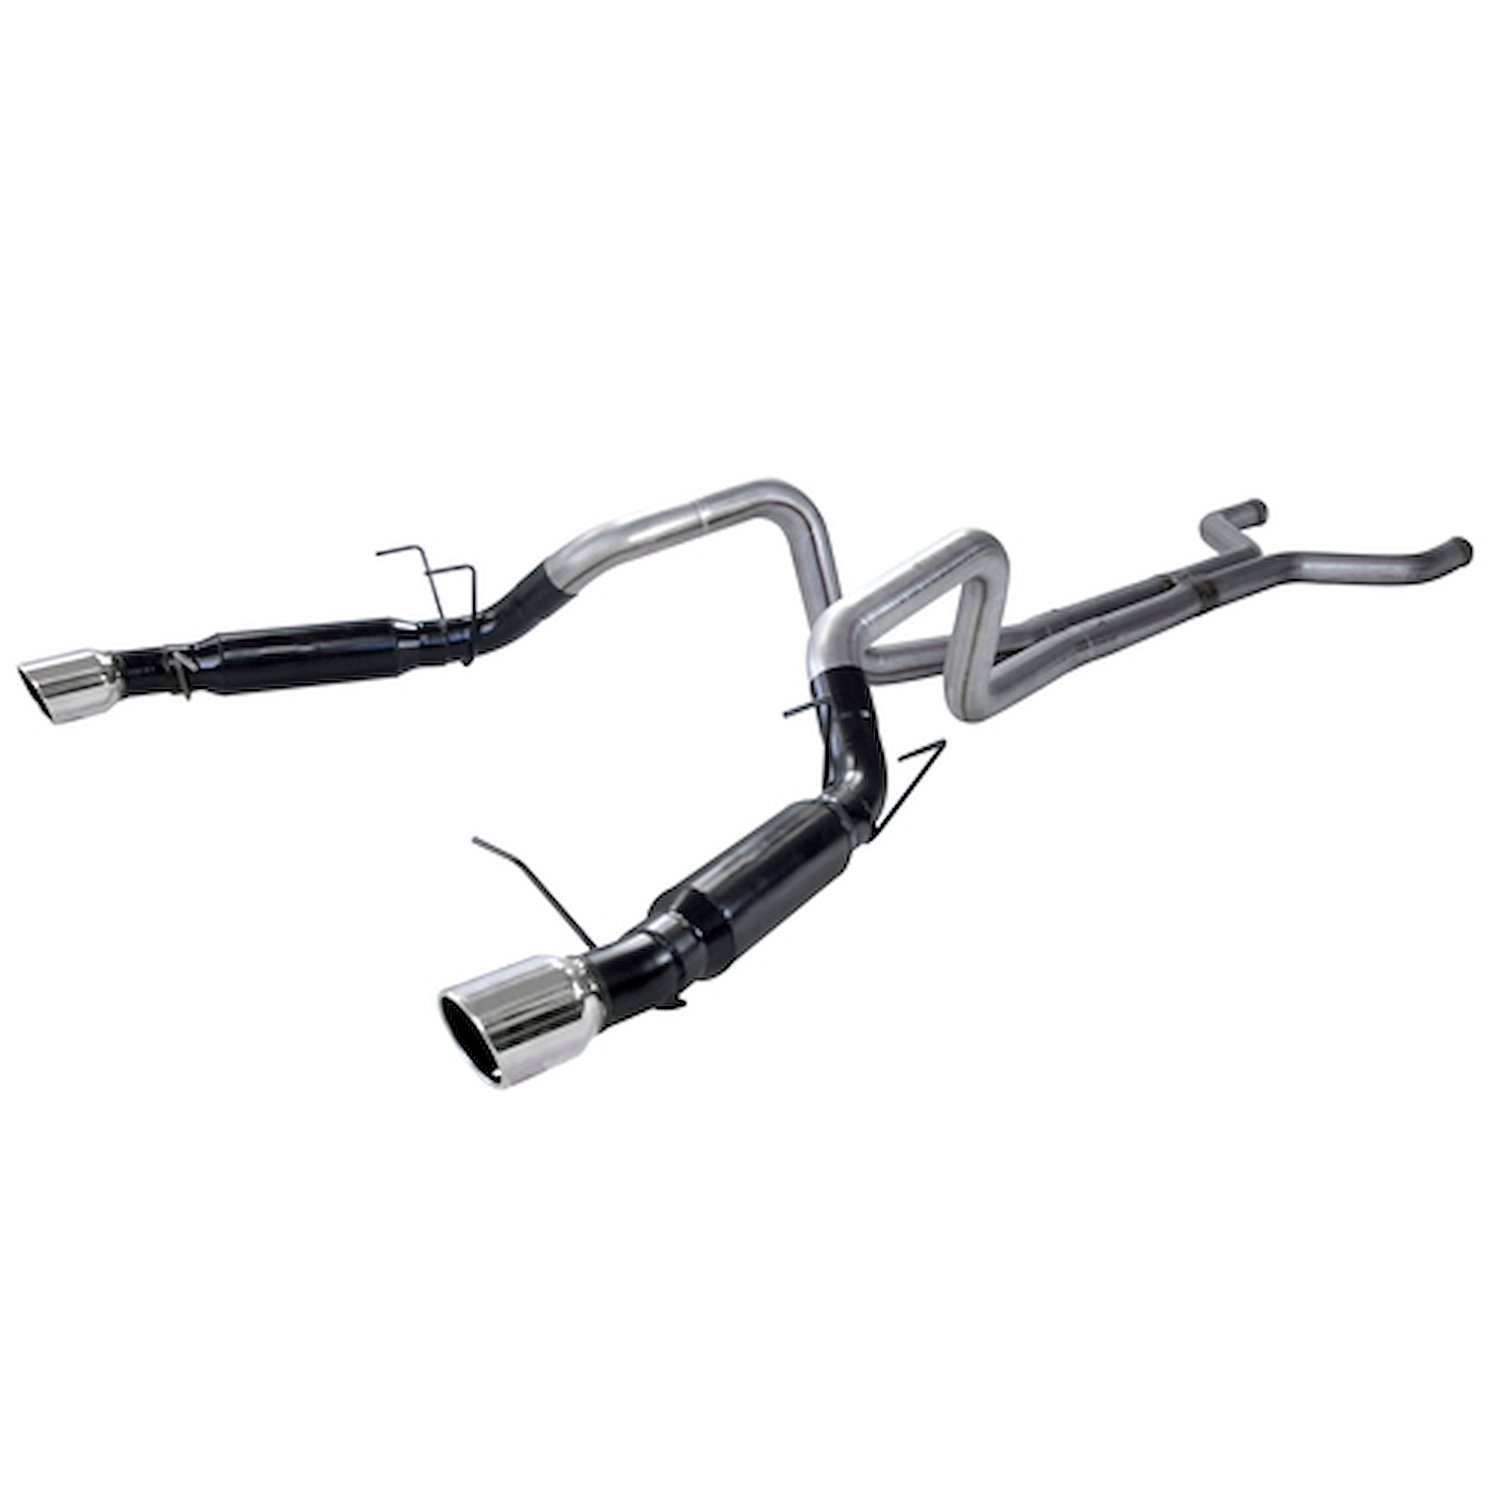 Outlaw Series Cat-Back Exhaust System 2013-2014 Ford Mustang GT 5.0L